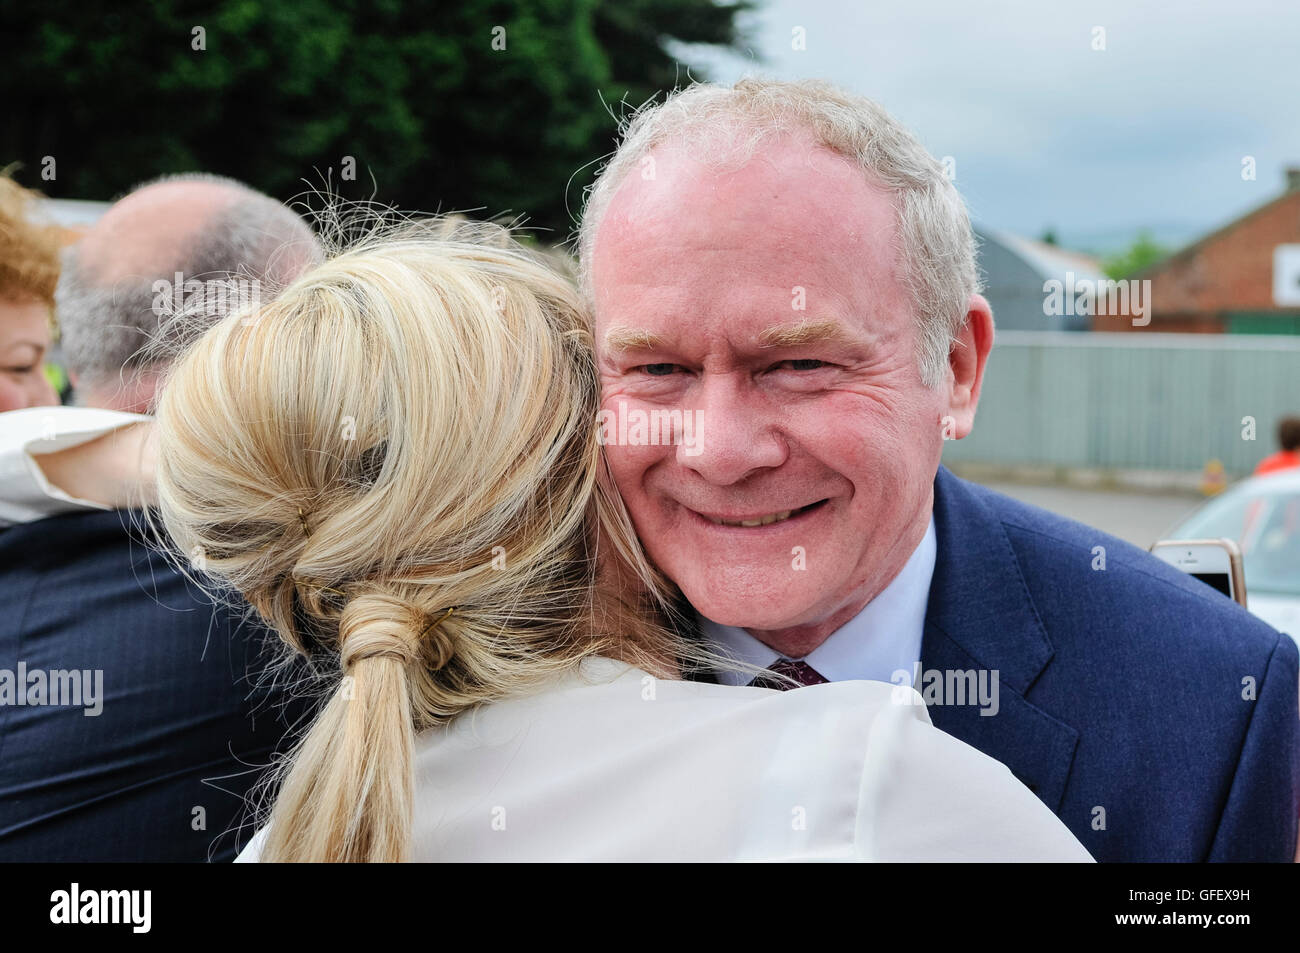 Belfast, Northern Ireland. 26 May 2014 -  Deputy First Minister Martin McGuinness smiles as he hugs colleague Michelle O'Neill Stock Photo